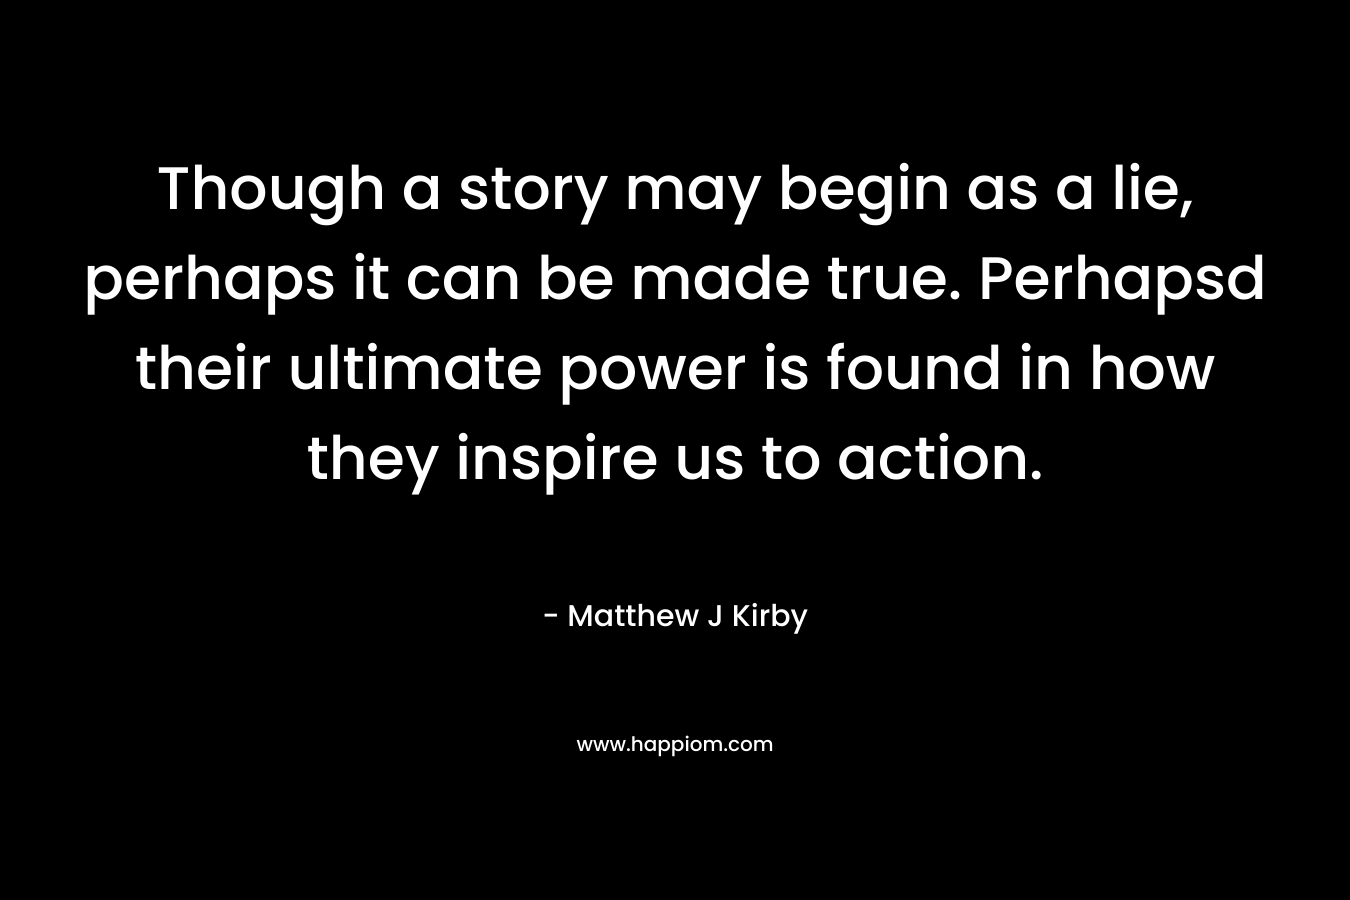 Though a story may begin as a lie, perhaps it can be made true. Perhapsd their ultimate power is found in how they inspire us to action. – Matthew J Kirby